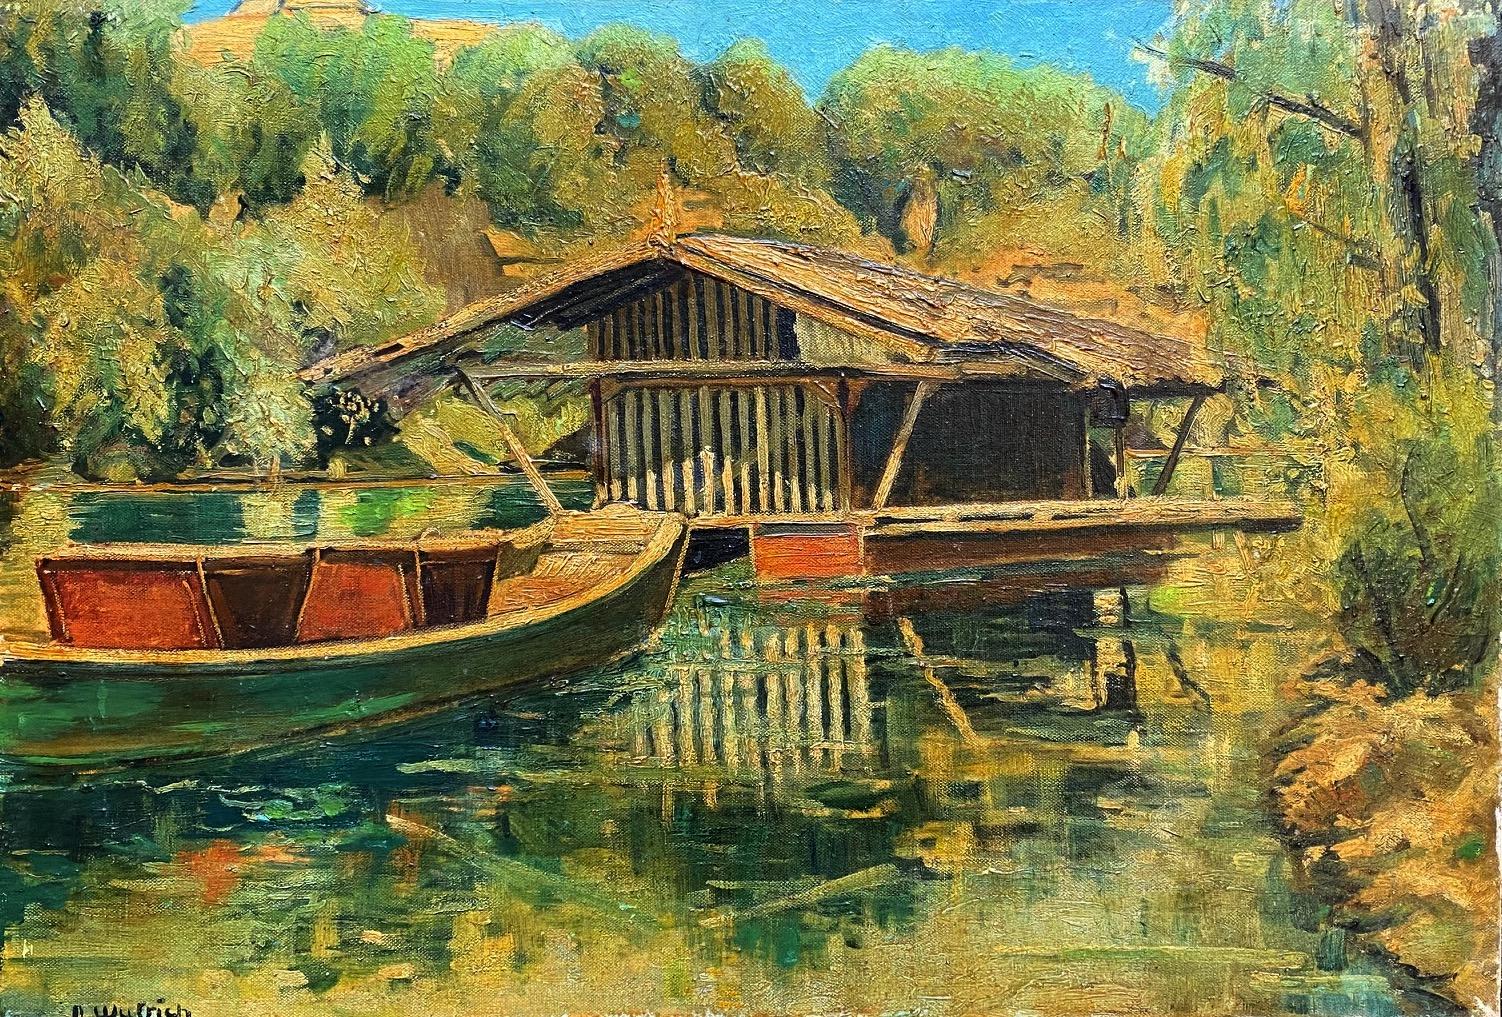 Walter Felix WUTRICH or "WALY" Landscape Painting - Cabin on stilts by WALY - Oil on canvas 41x60 cm